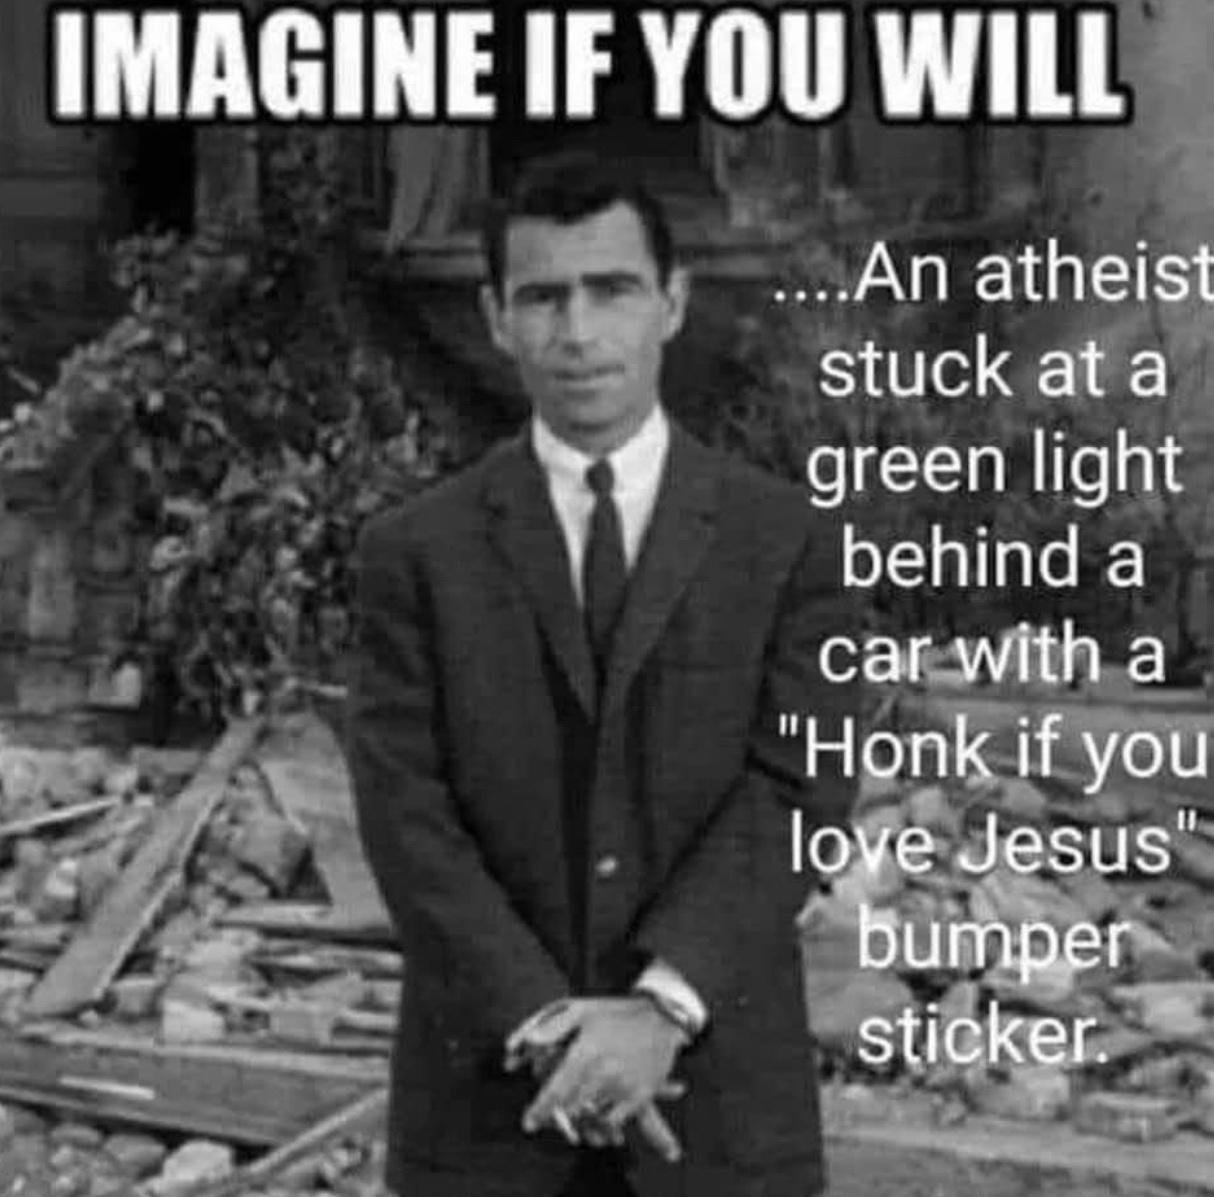 imagine if you will meme - Imagine If You Will ...An atheist stuck at a green light behind a car with a "Honk if you love Jesus" bumper sticker.